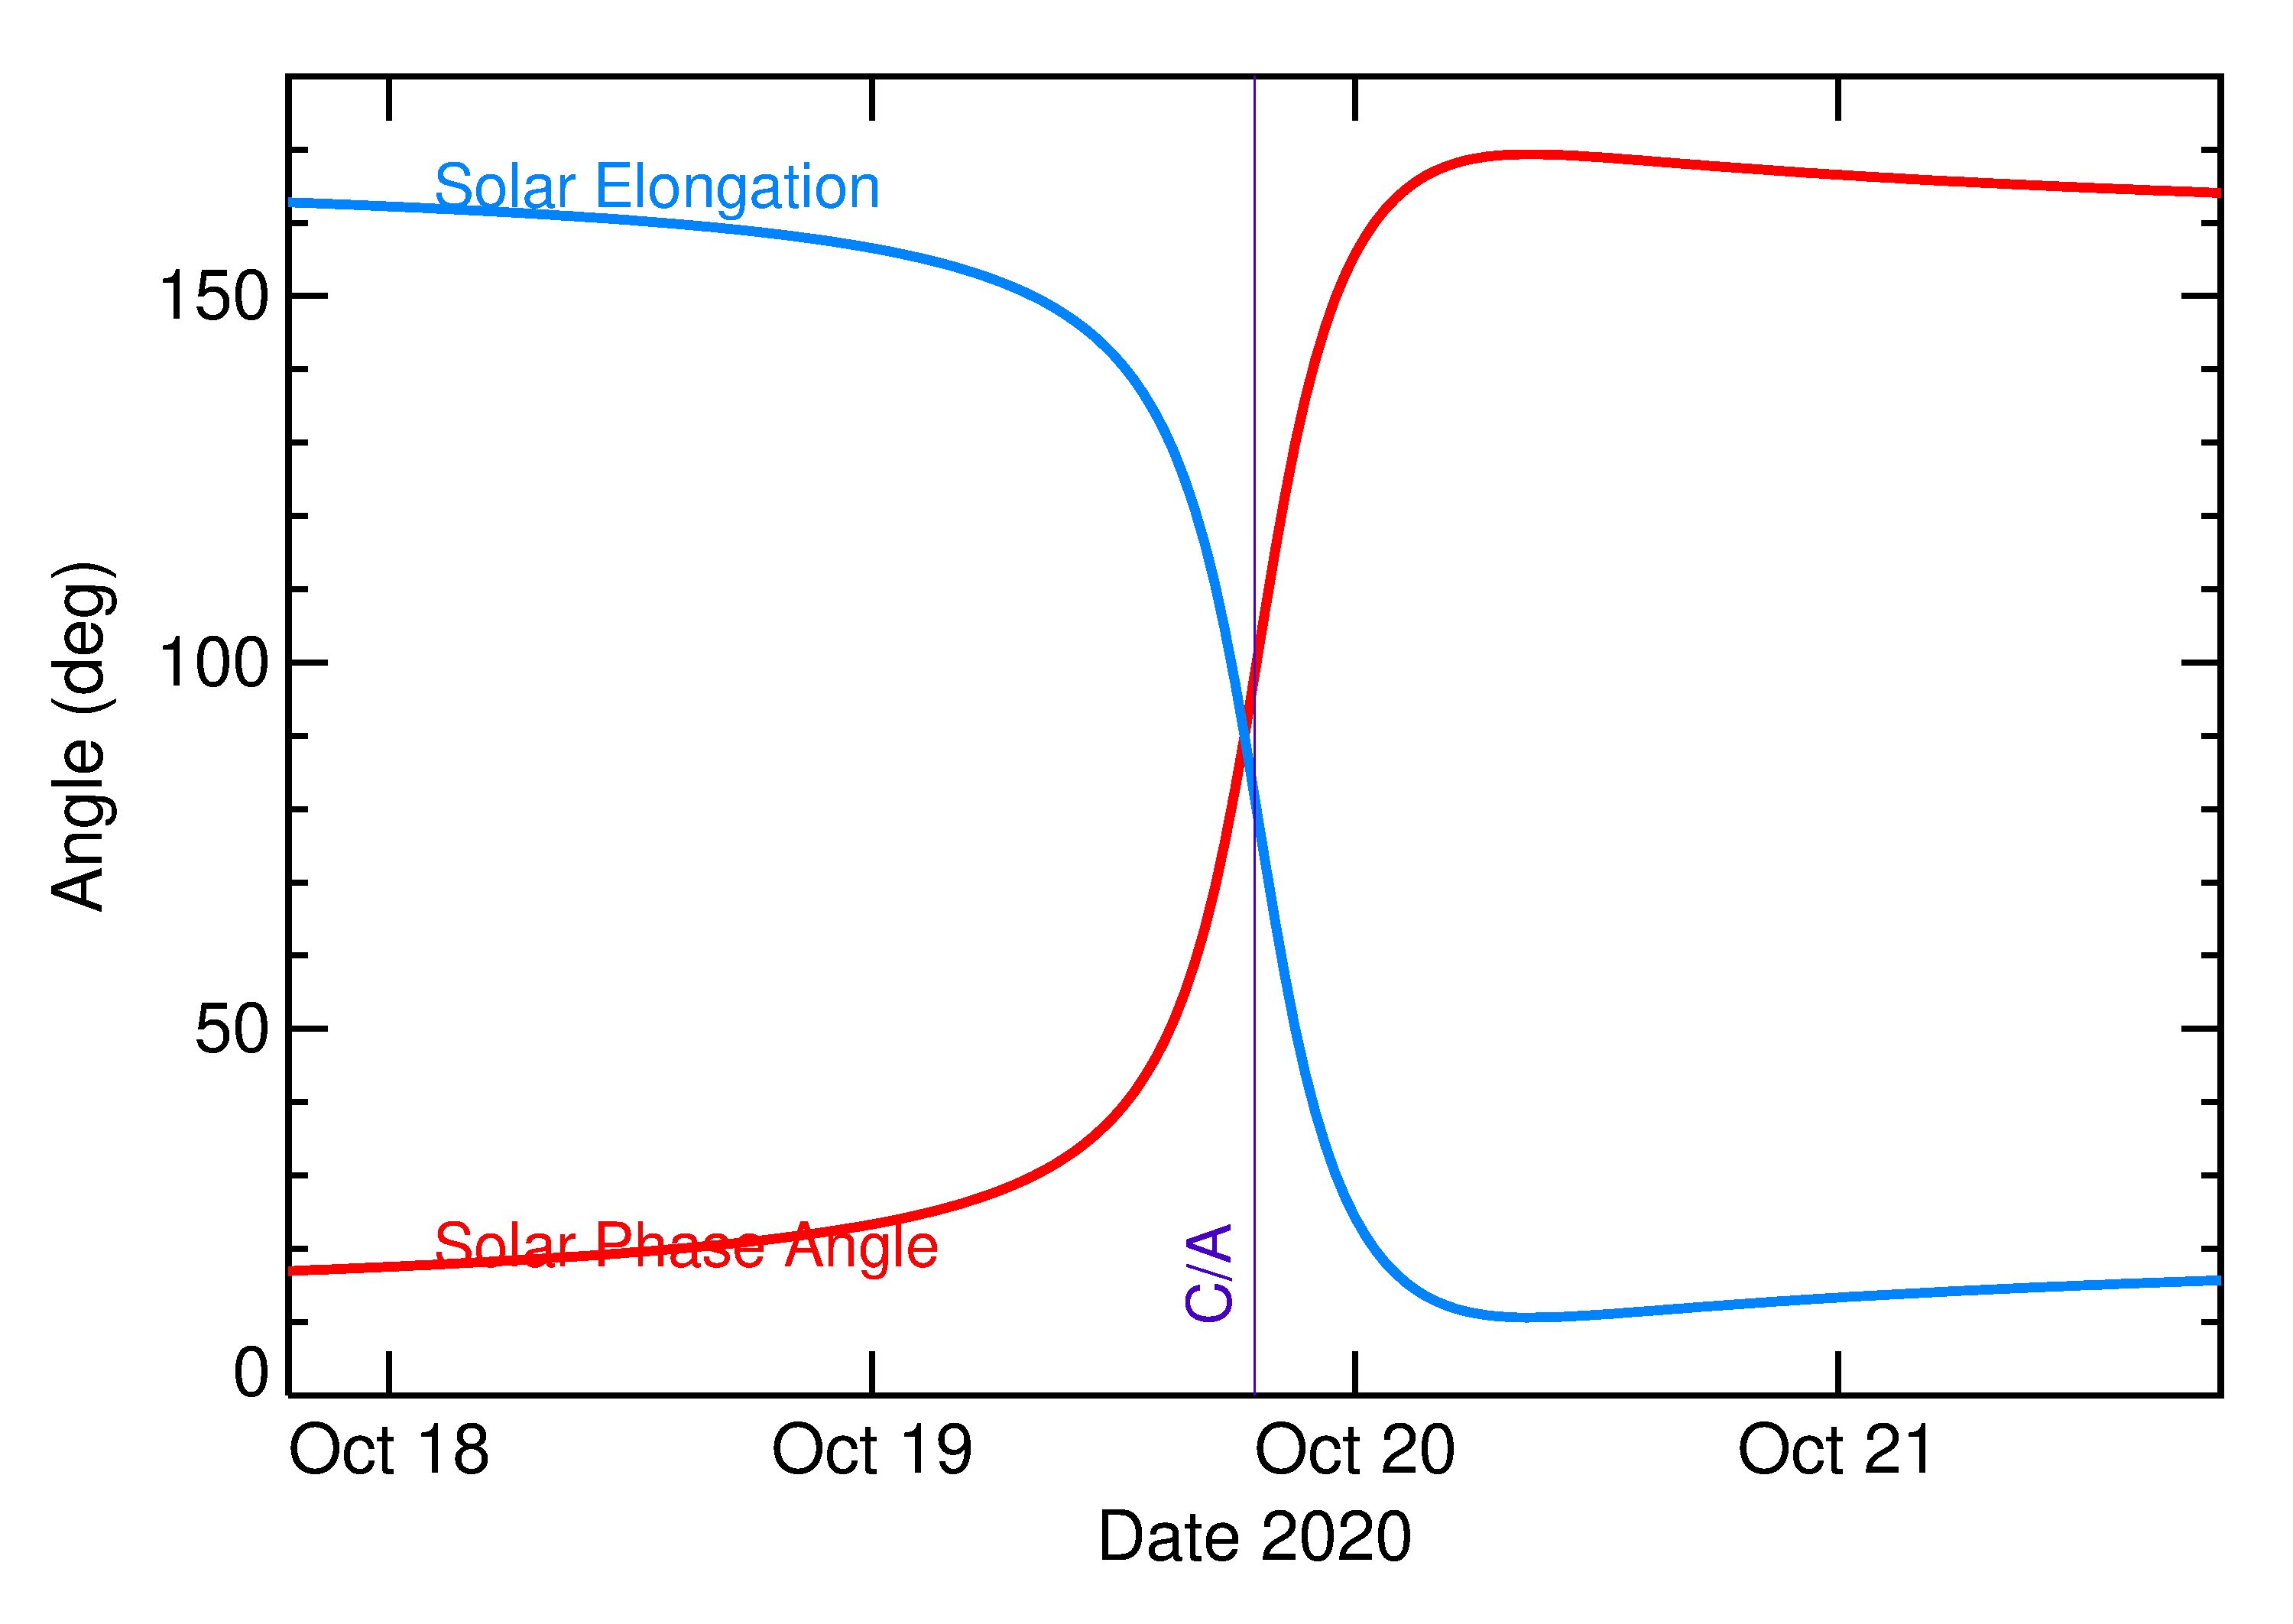 Solar Elongation and Solar Phase Angle of 2020 TF6 in the days around closest approach